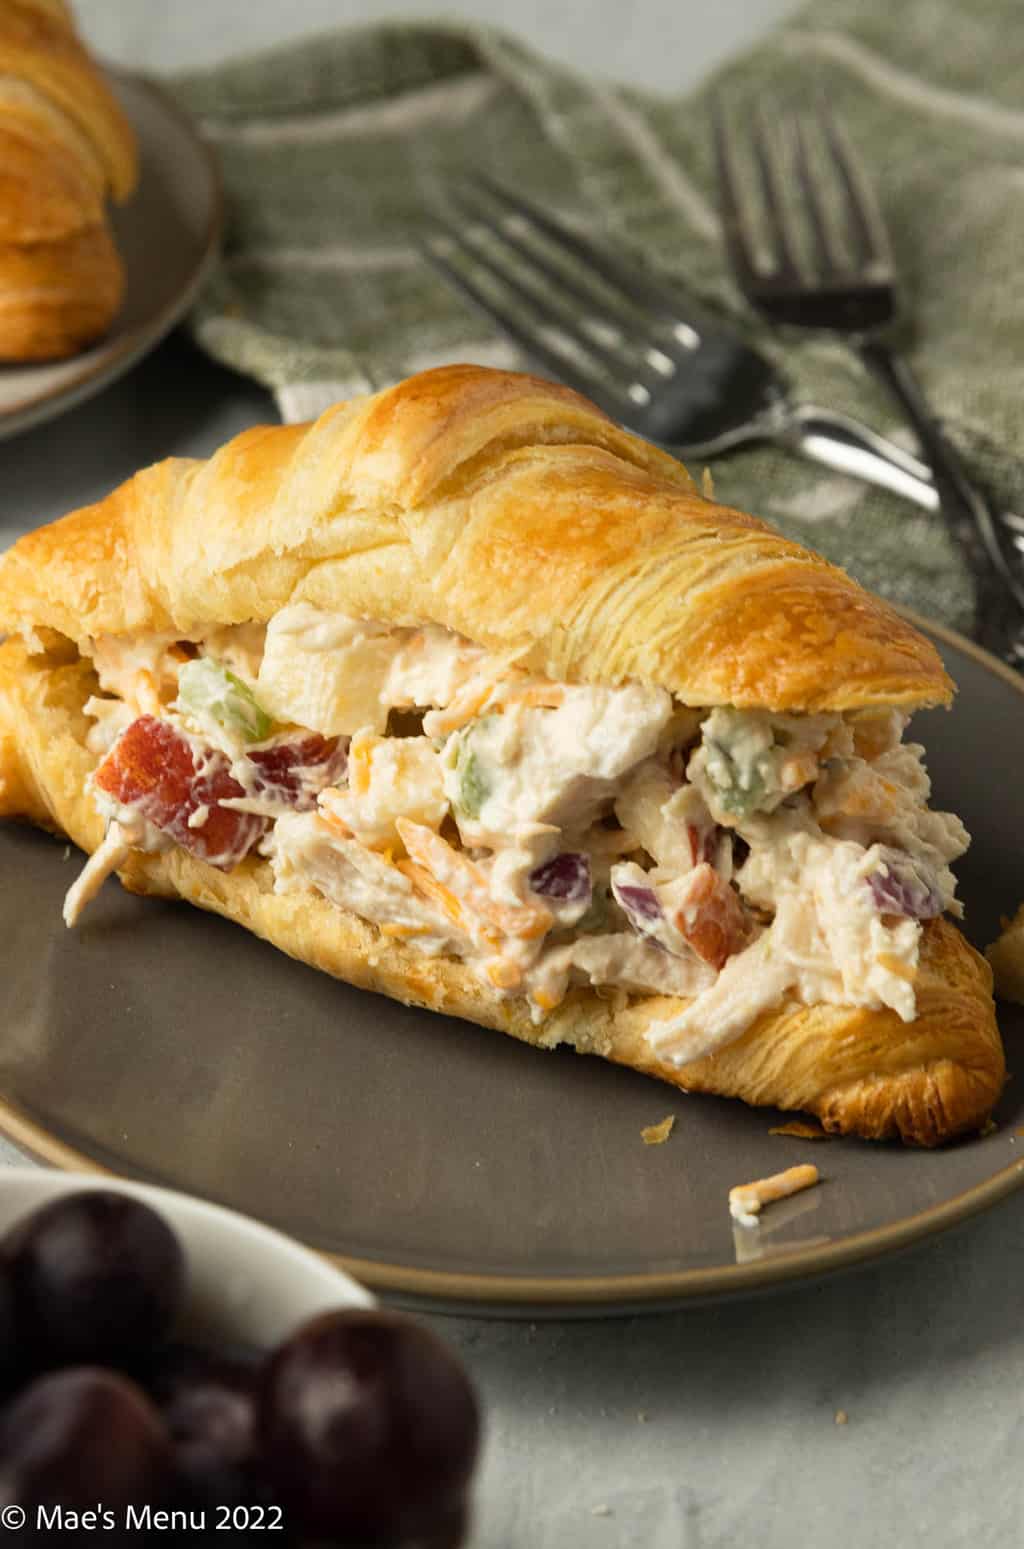 An up-close side shot of a large croissant stuffed with chicken salad.